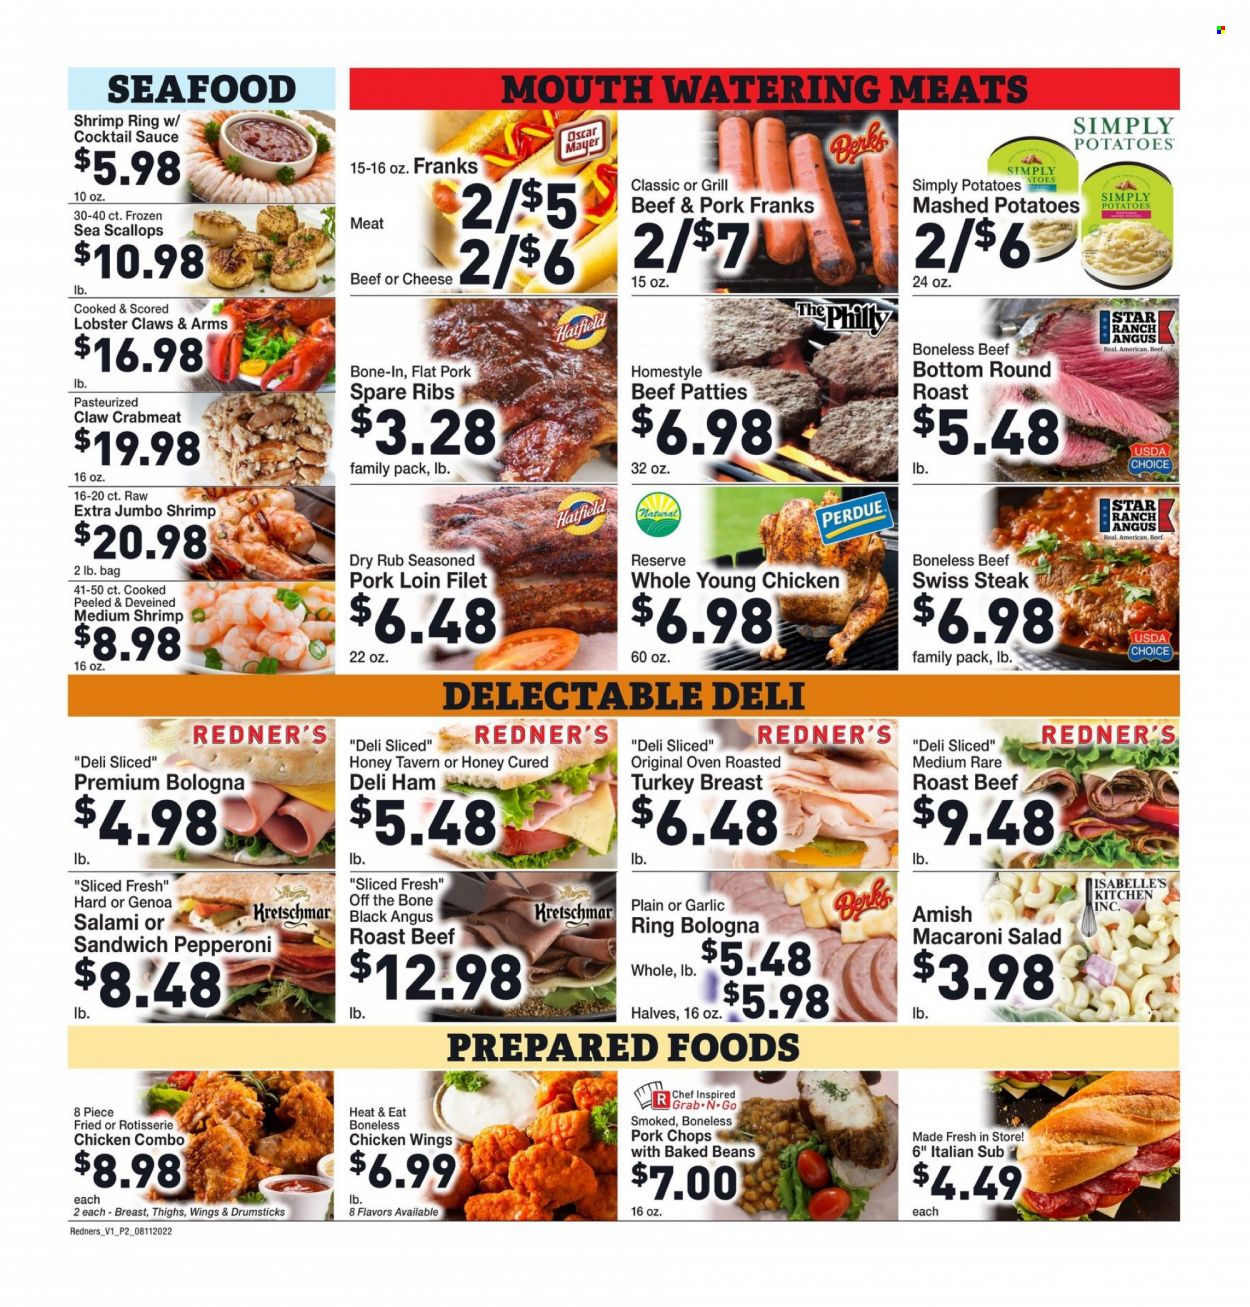 thumbnail - Redner's Markets Flyer - 08/11/2022 - 08/17/2022 - Sales products - beans, garlic, salad, crab meat, lobster, scallops, seafood, shrimps, mashed potatoes, chicken roast, sandwich, sauce, Perdue®, salami, ham, bologna sausage, Oscar Mayer, pepperoni, macaroni salad, chicken wings, baked beans, cocktail sauce, beef meat, steak, round roast, roast beef, pork chops, pork loin, pork meat, pork ribs, pork spare ribs. Page 4.